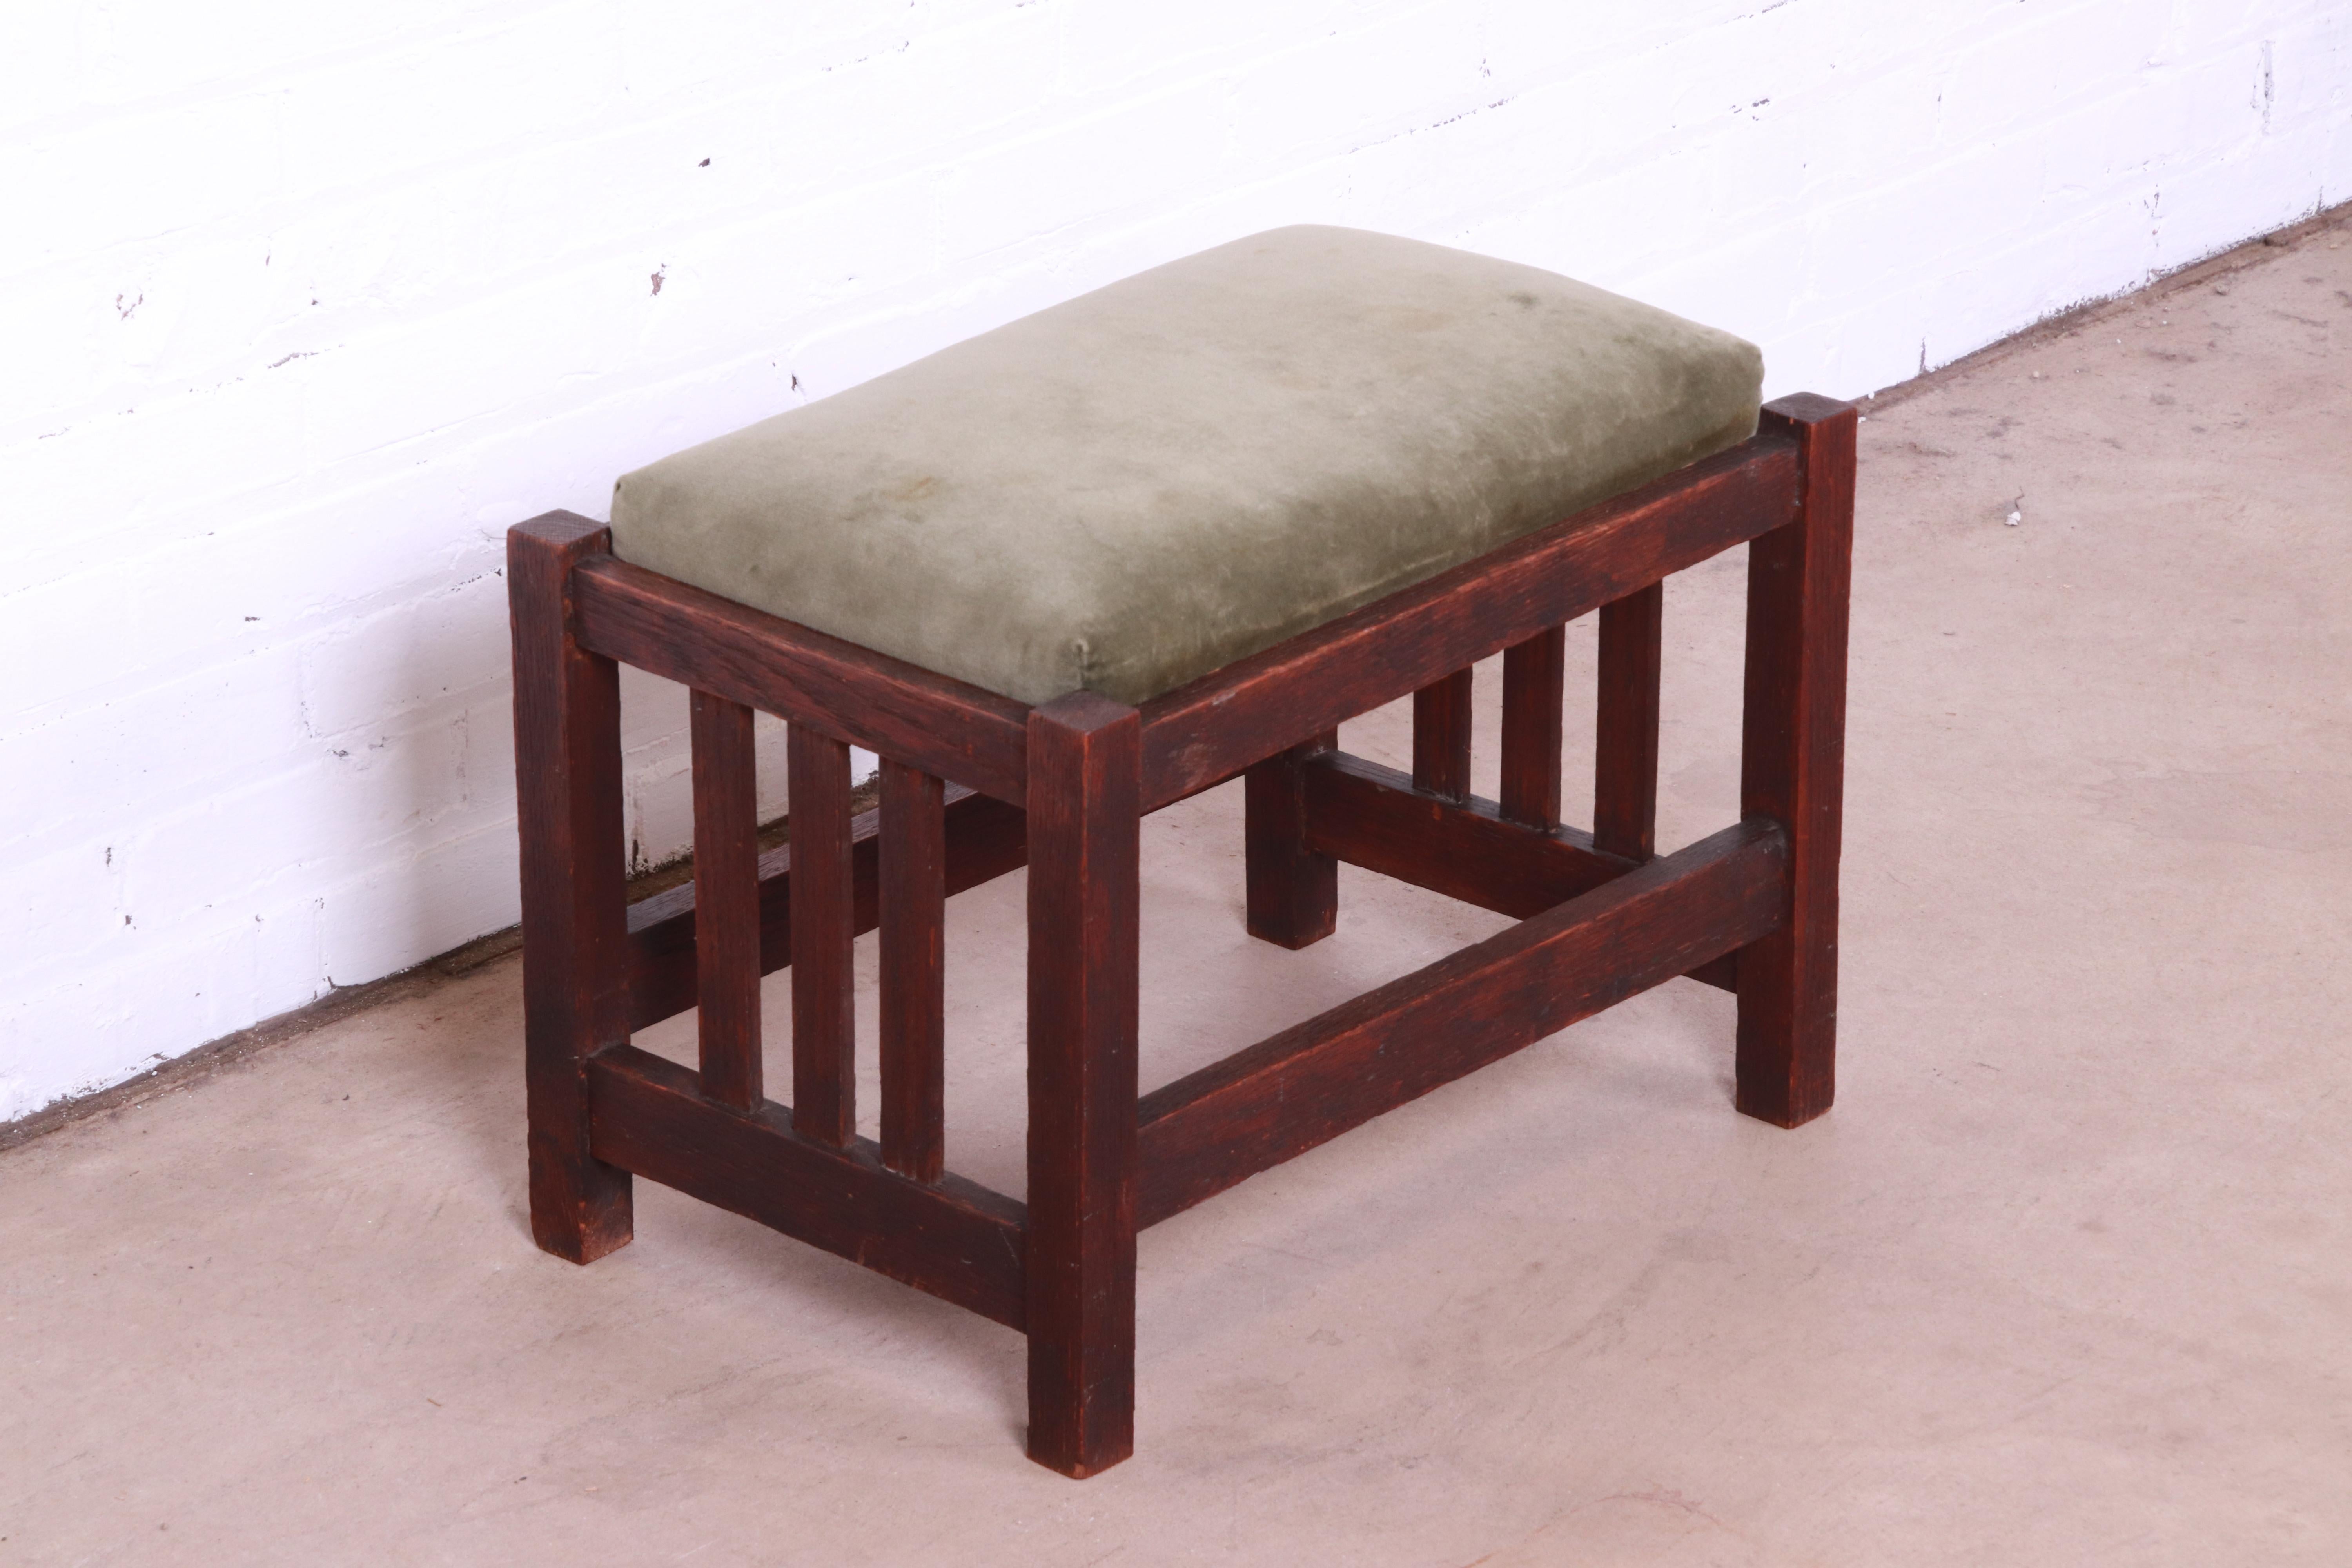 Arts and Crafts Antique Mission Oak Arts & Crafts Footstool or Ottoman Attributed to Stickley